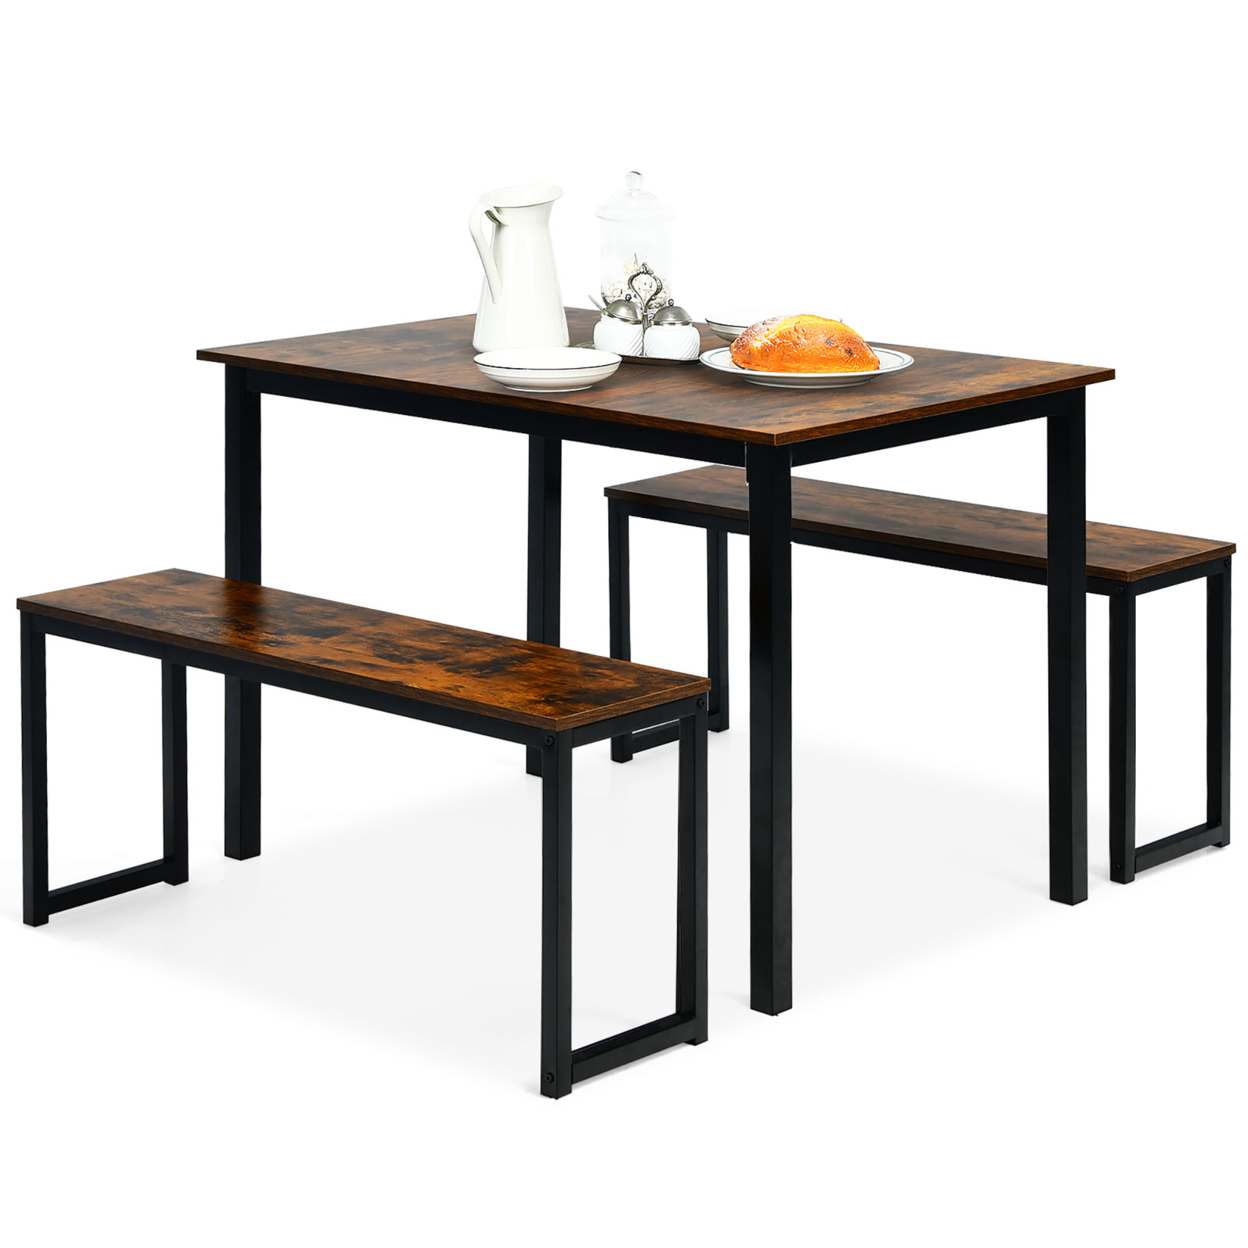 Costway 3pcs Dining Table Set Modern Studio Collection Table and 2 Bench - Coffee